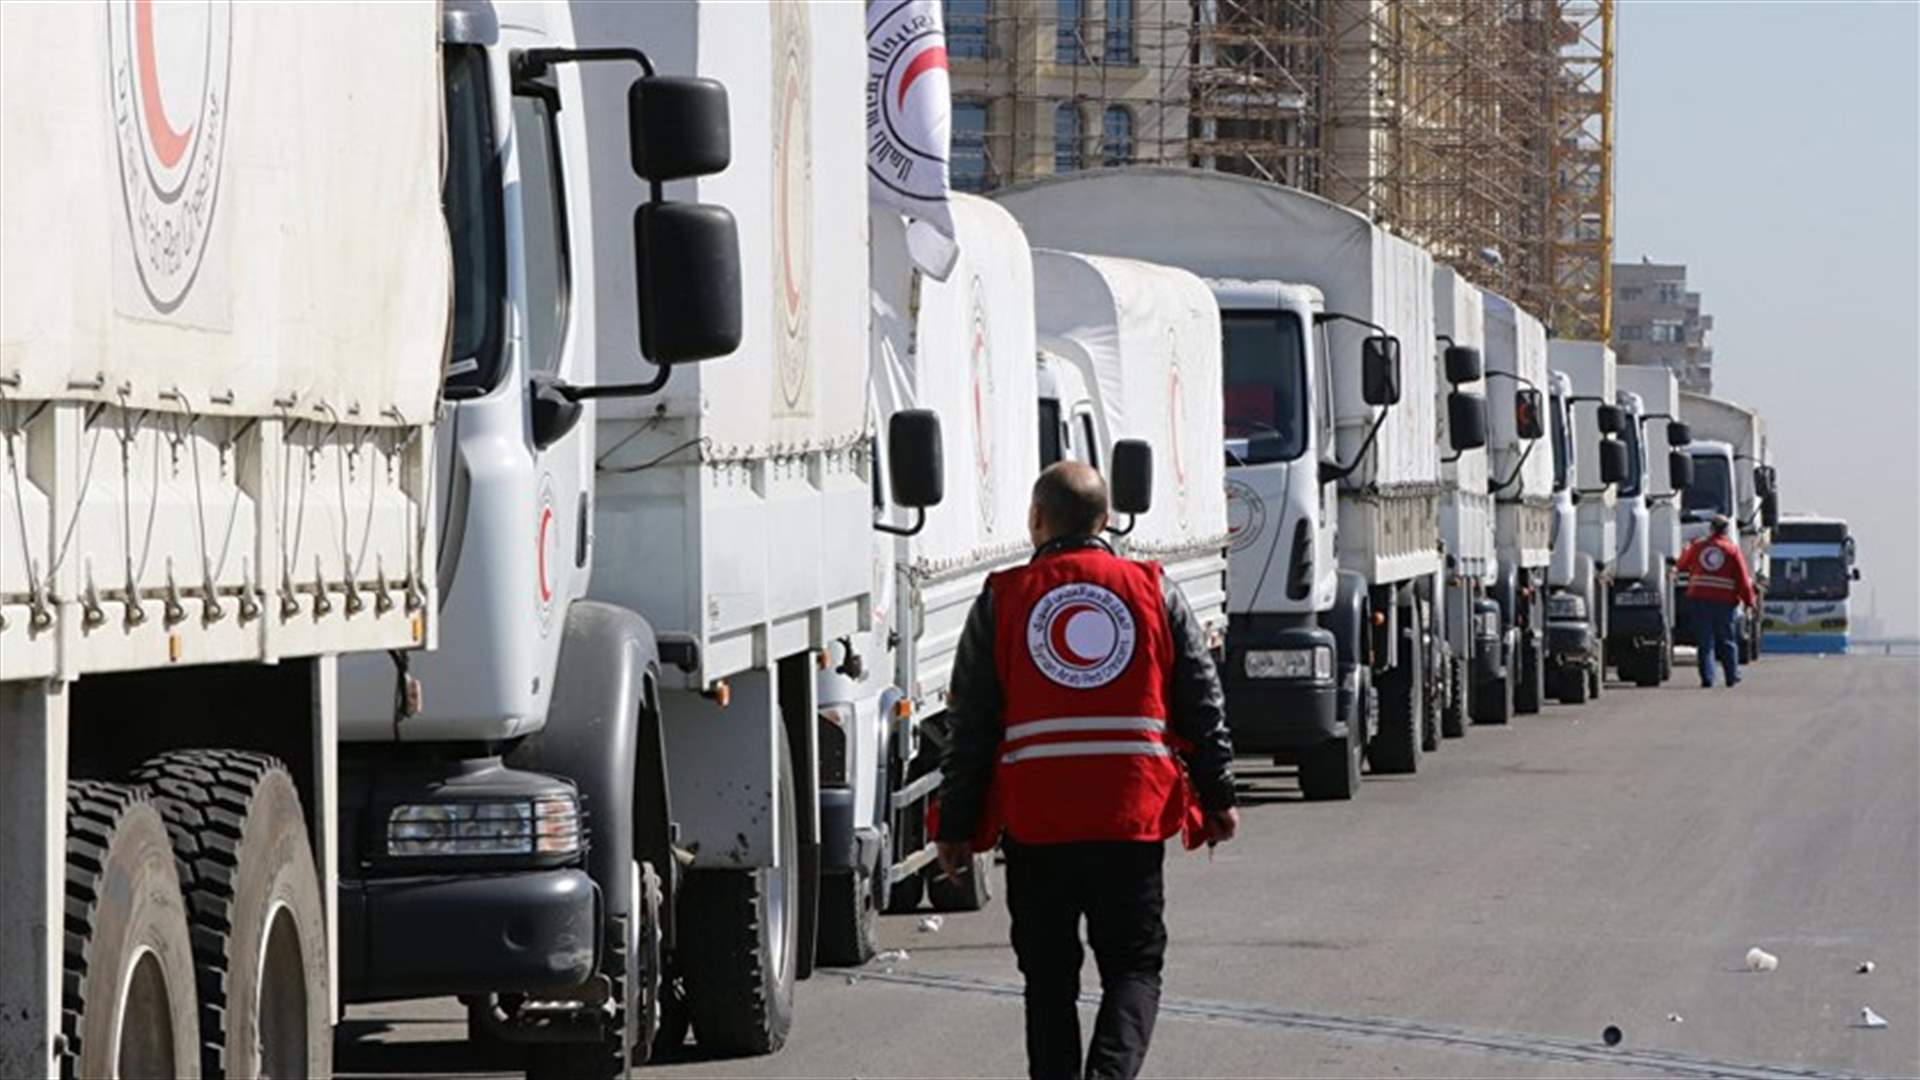 UN resumes Syria aid delivery with convoy to besieged area